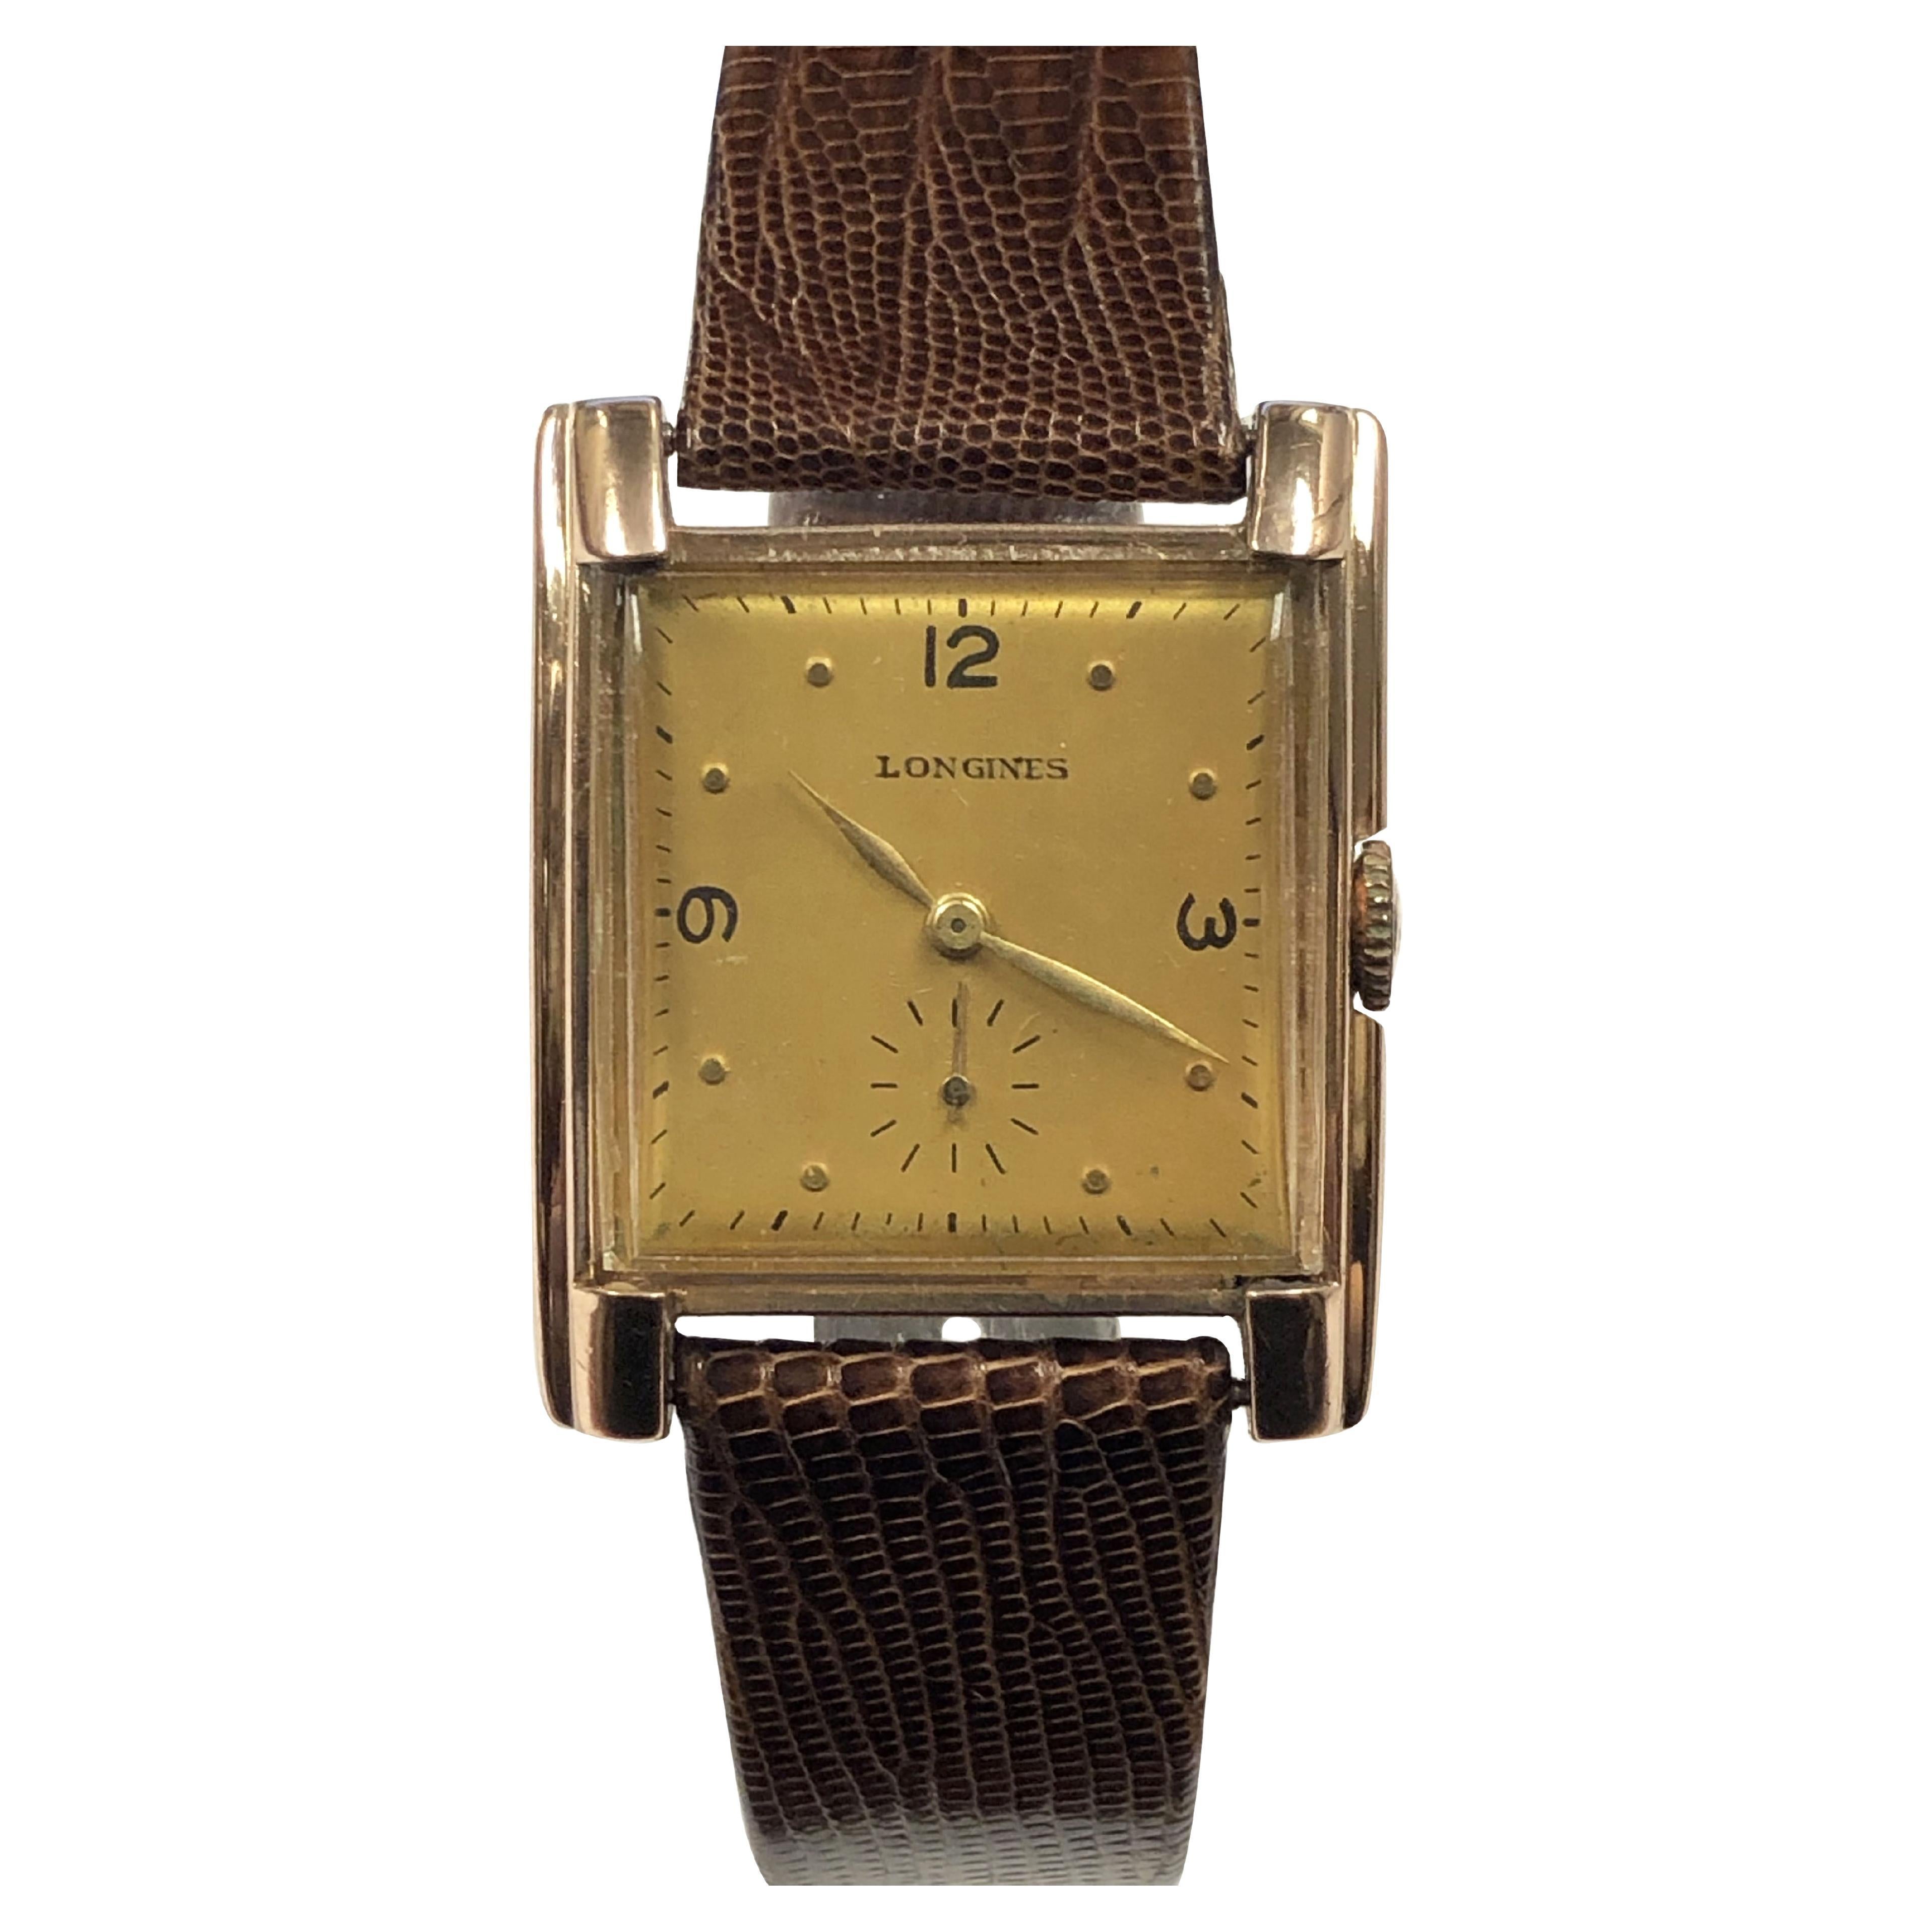 Vintage Longines Watches - 5 For Sale on 1stDibs